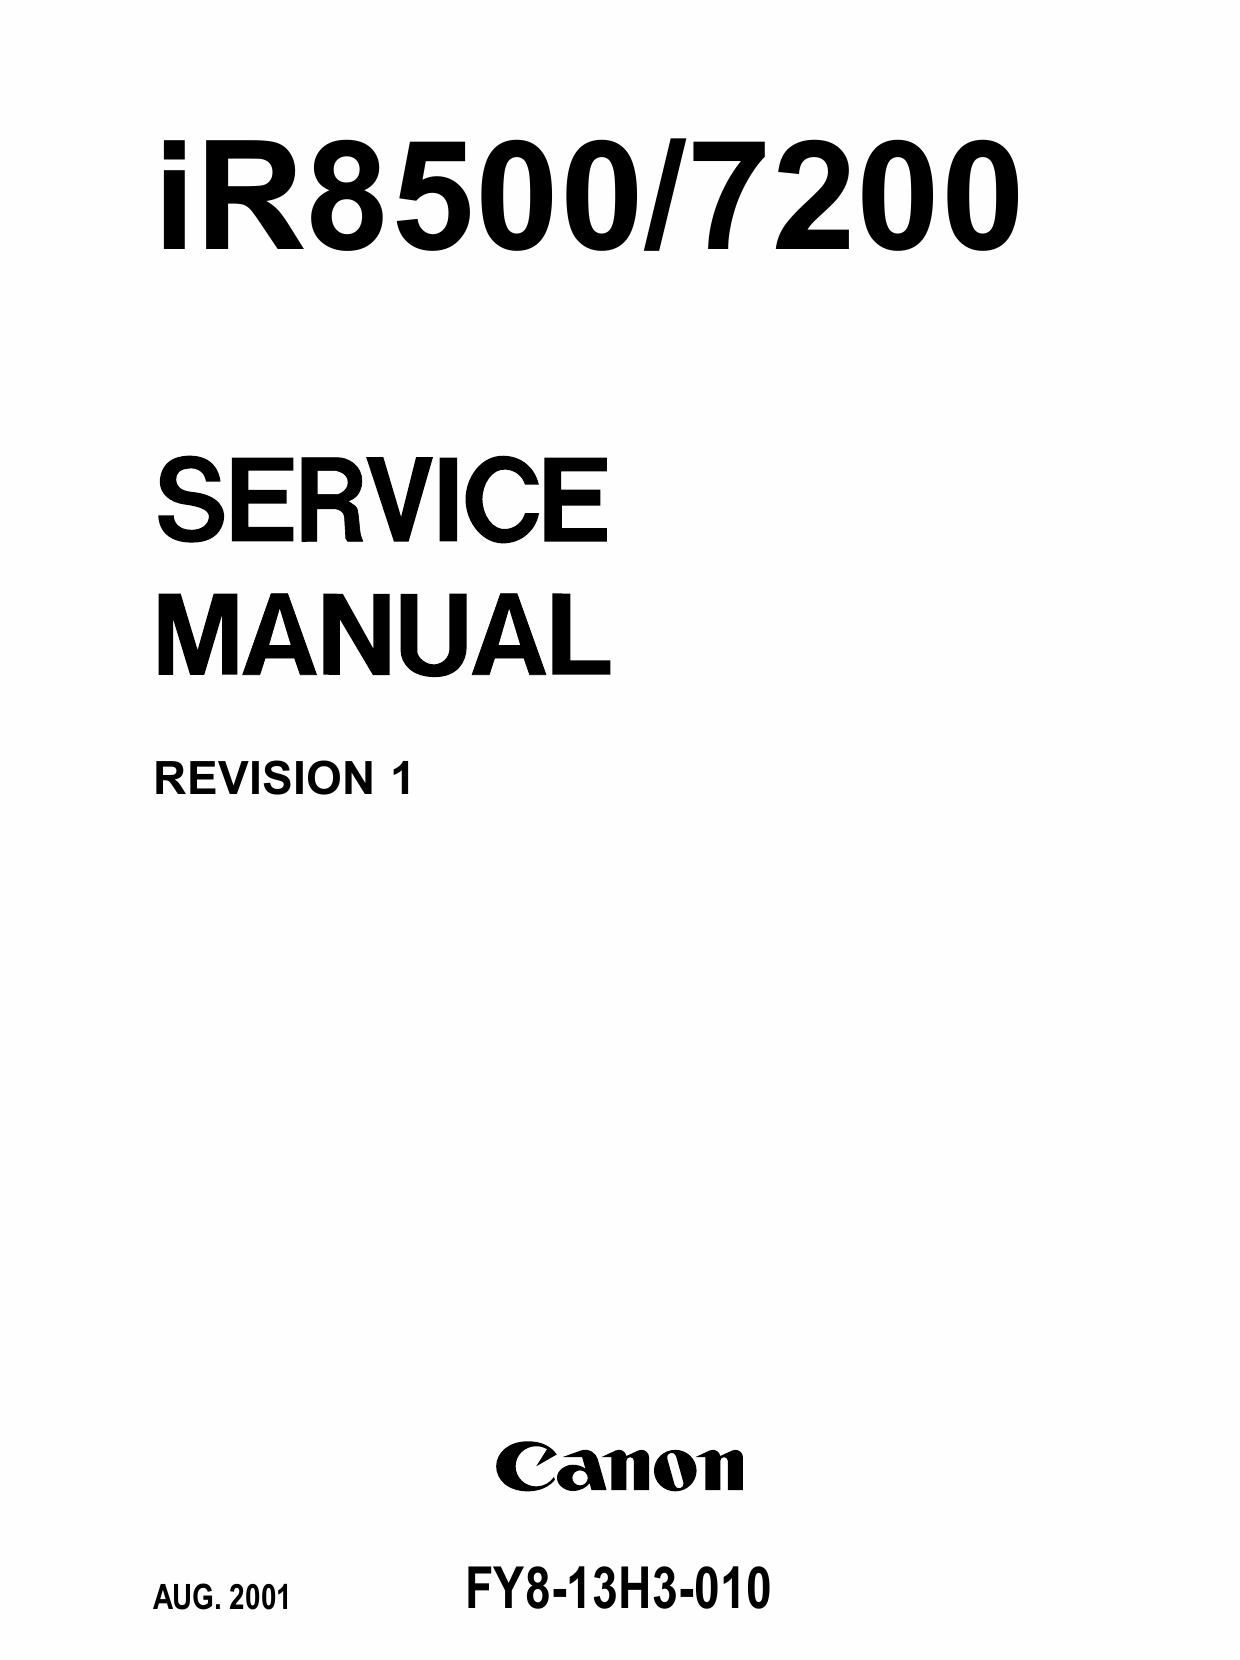 Canon imageRUNNER iR-8500 7200 Parts and Service Manual-1